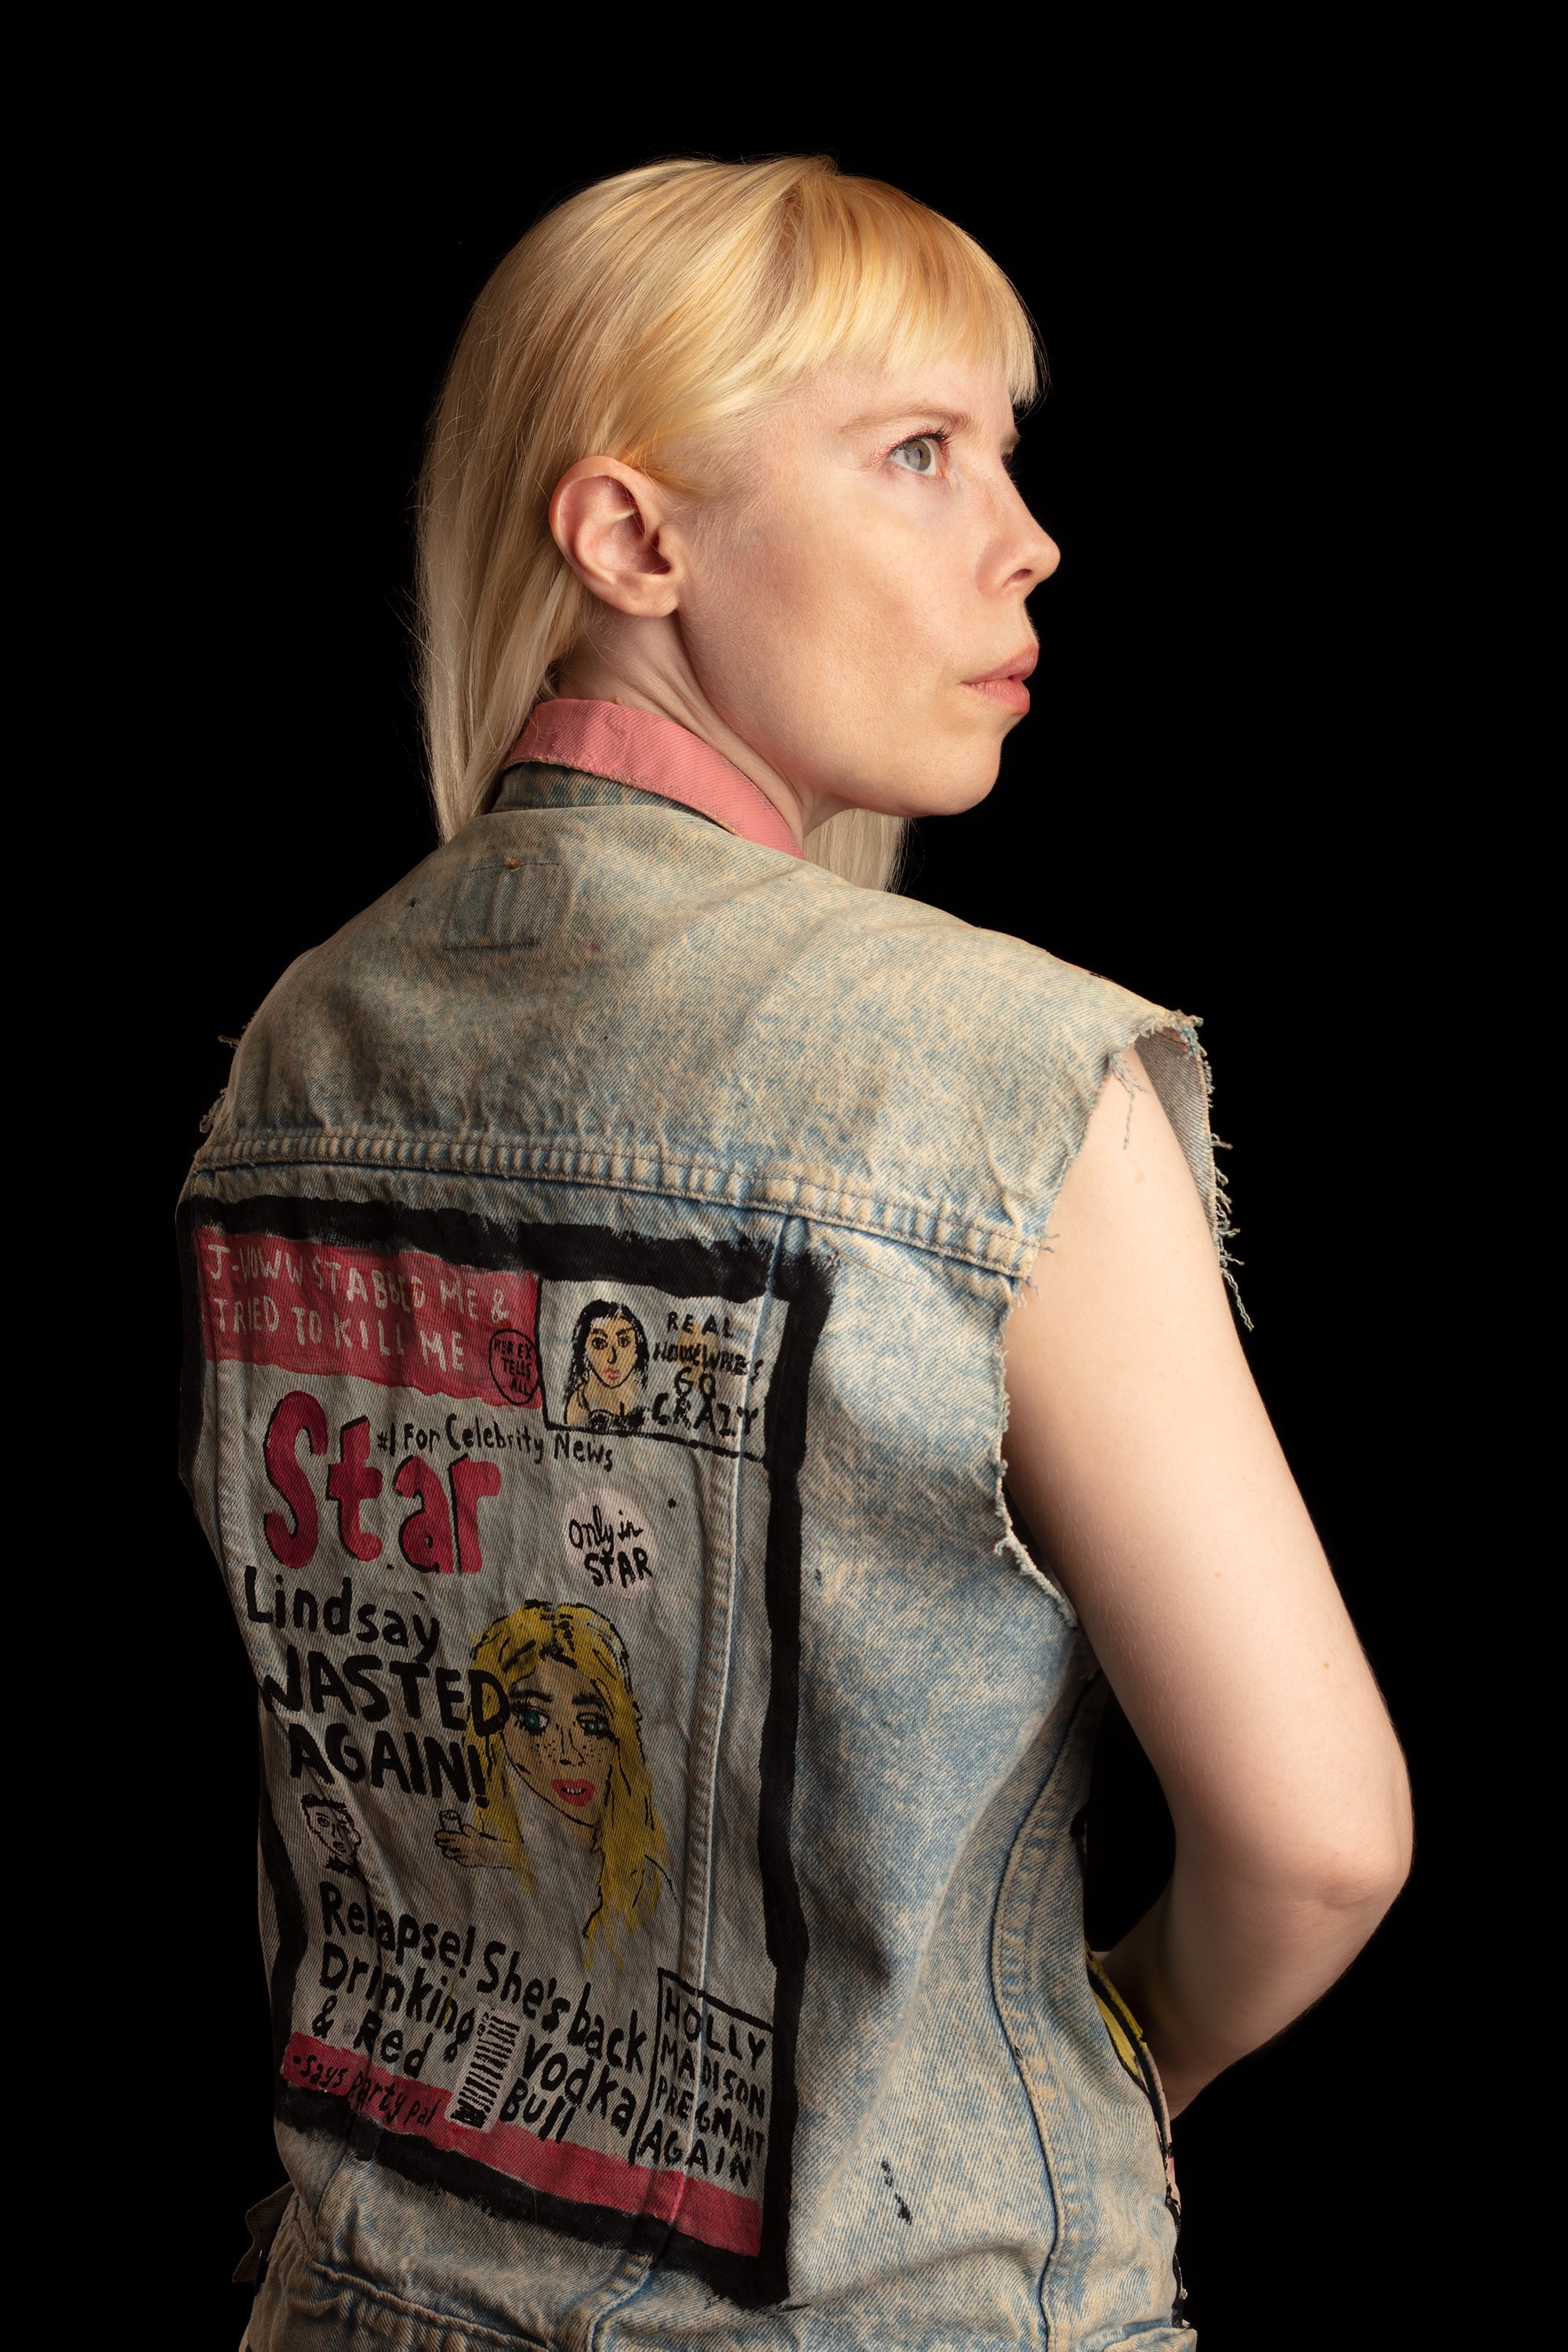 Kate Durbin is standing facing away from the camera, with her face visible in profile, wearing a cutoff denim vest with an illustrated tabloid cover on the back.